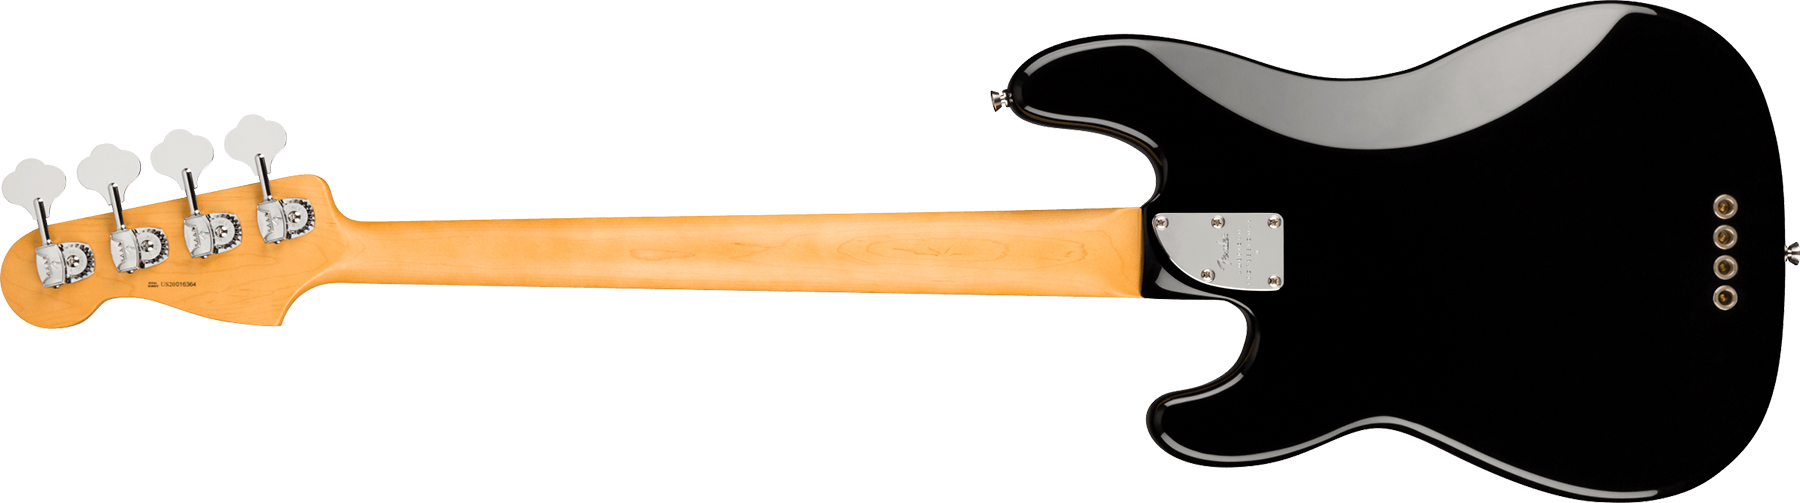 Fender Precision Bass American Professional Ii Usa Mn - Black - Basse Électrique Solid Body - Variation 1